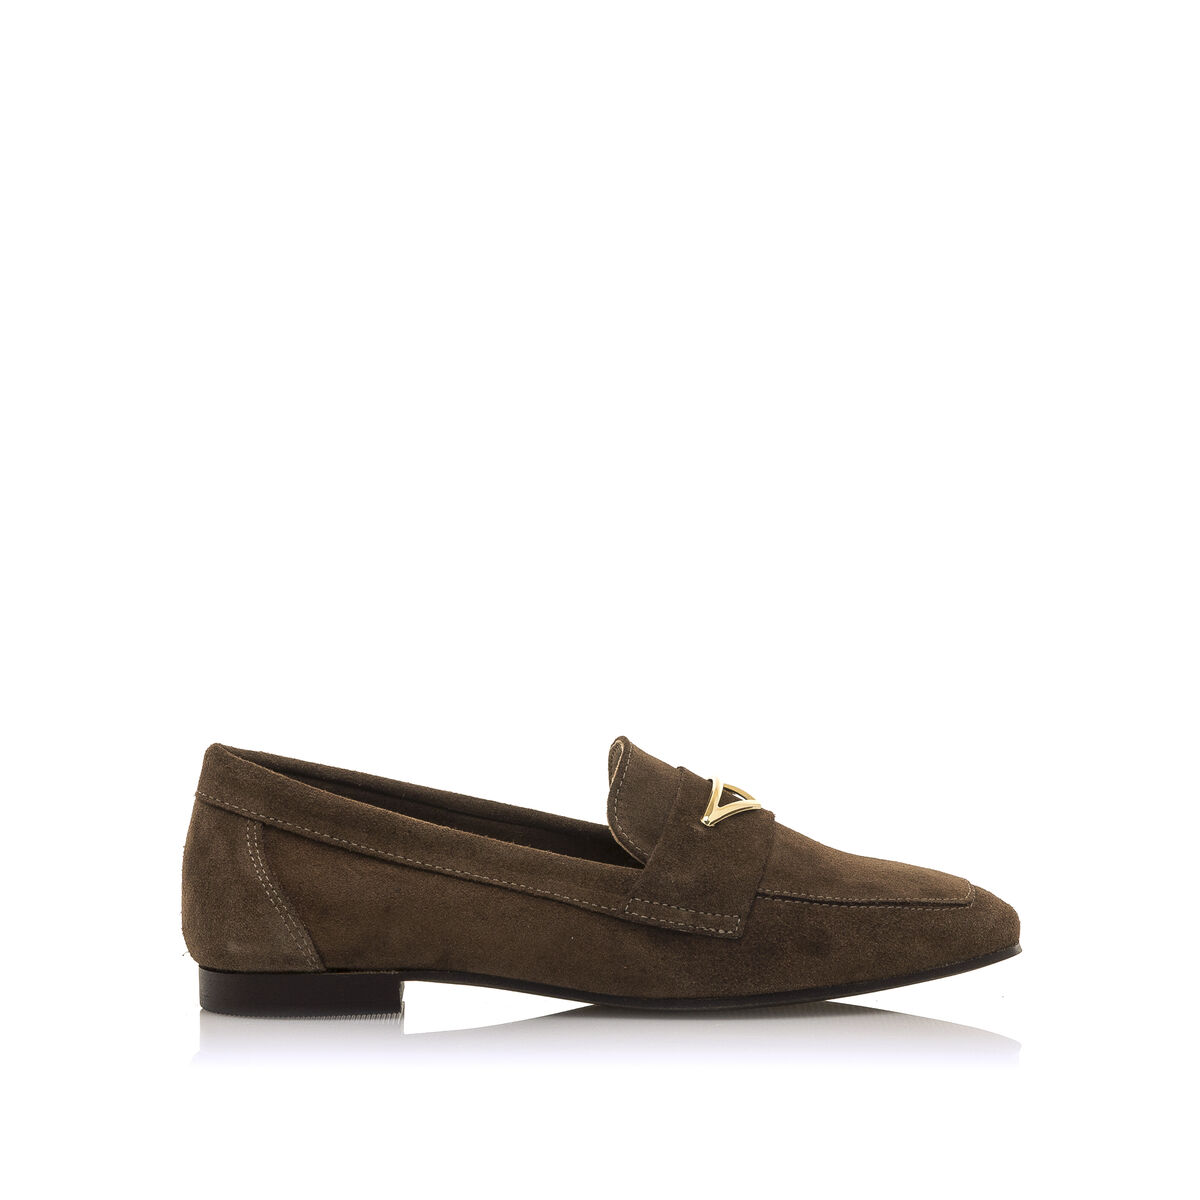 MTNG FLAT BROWN WOMEN LOAFERS